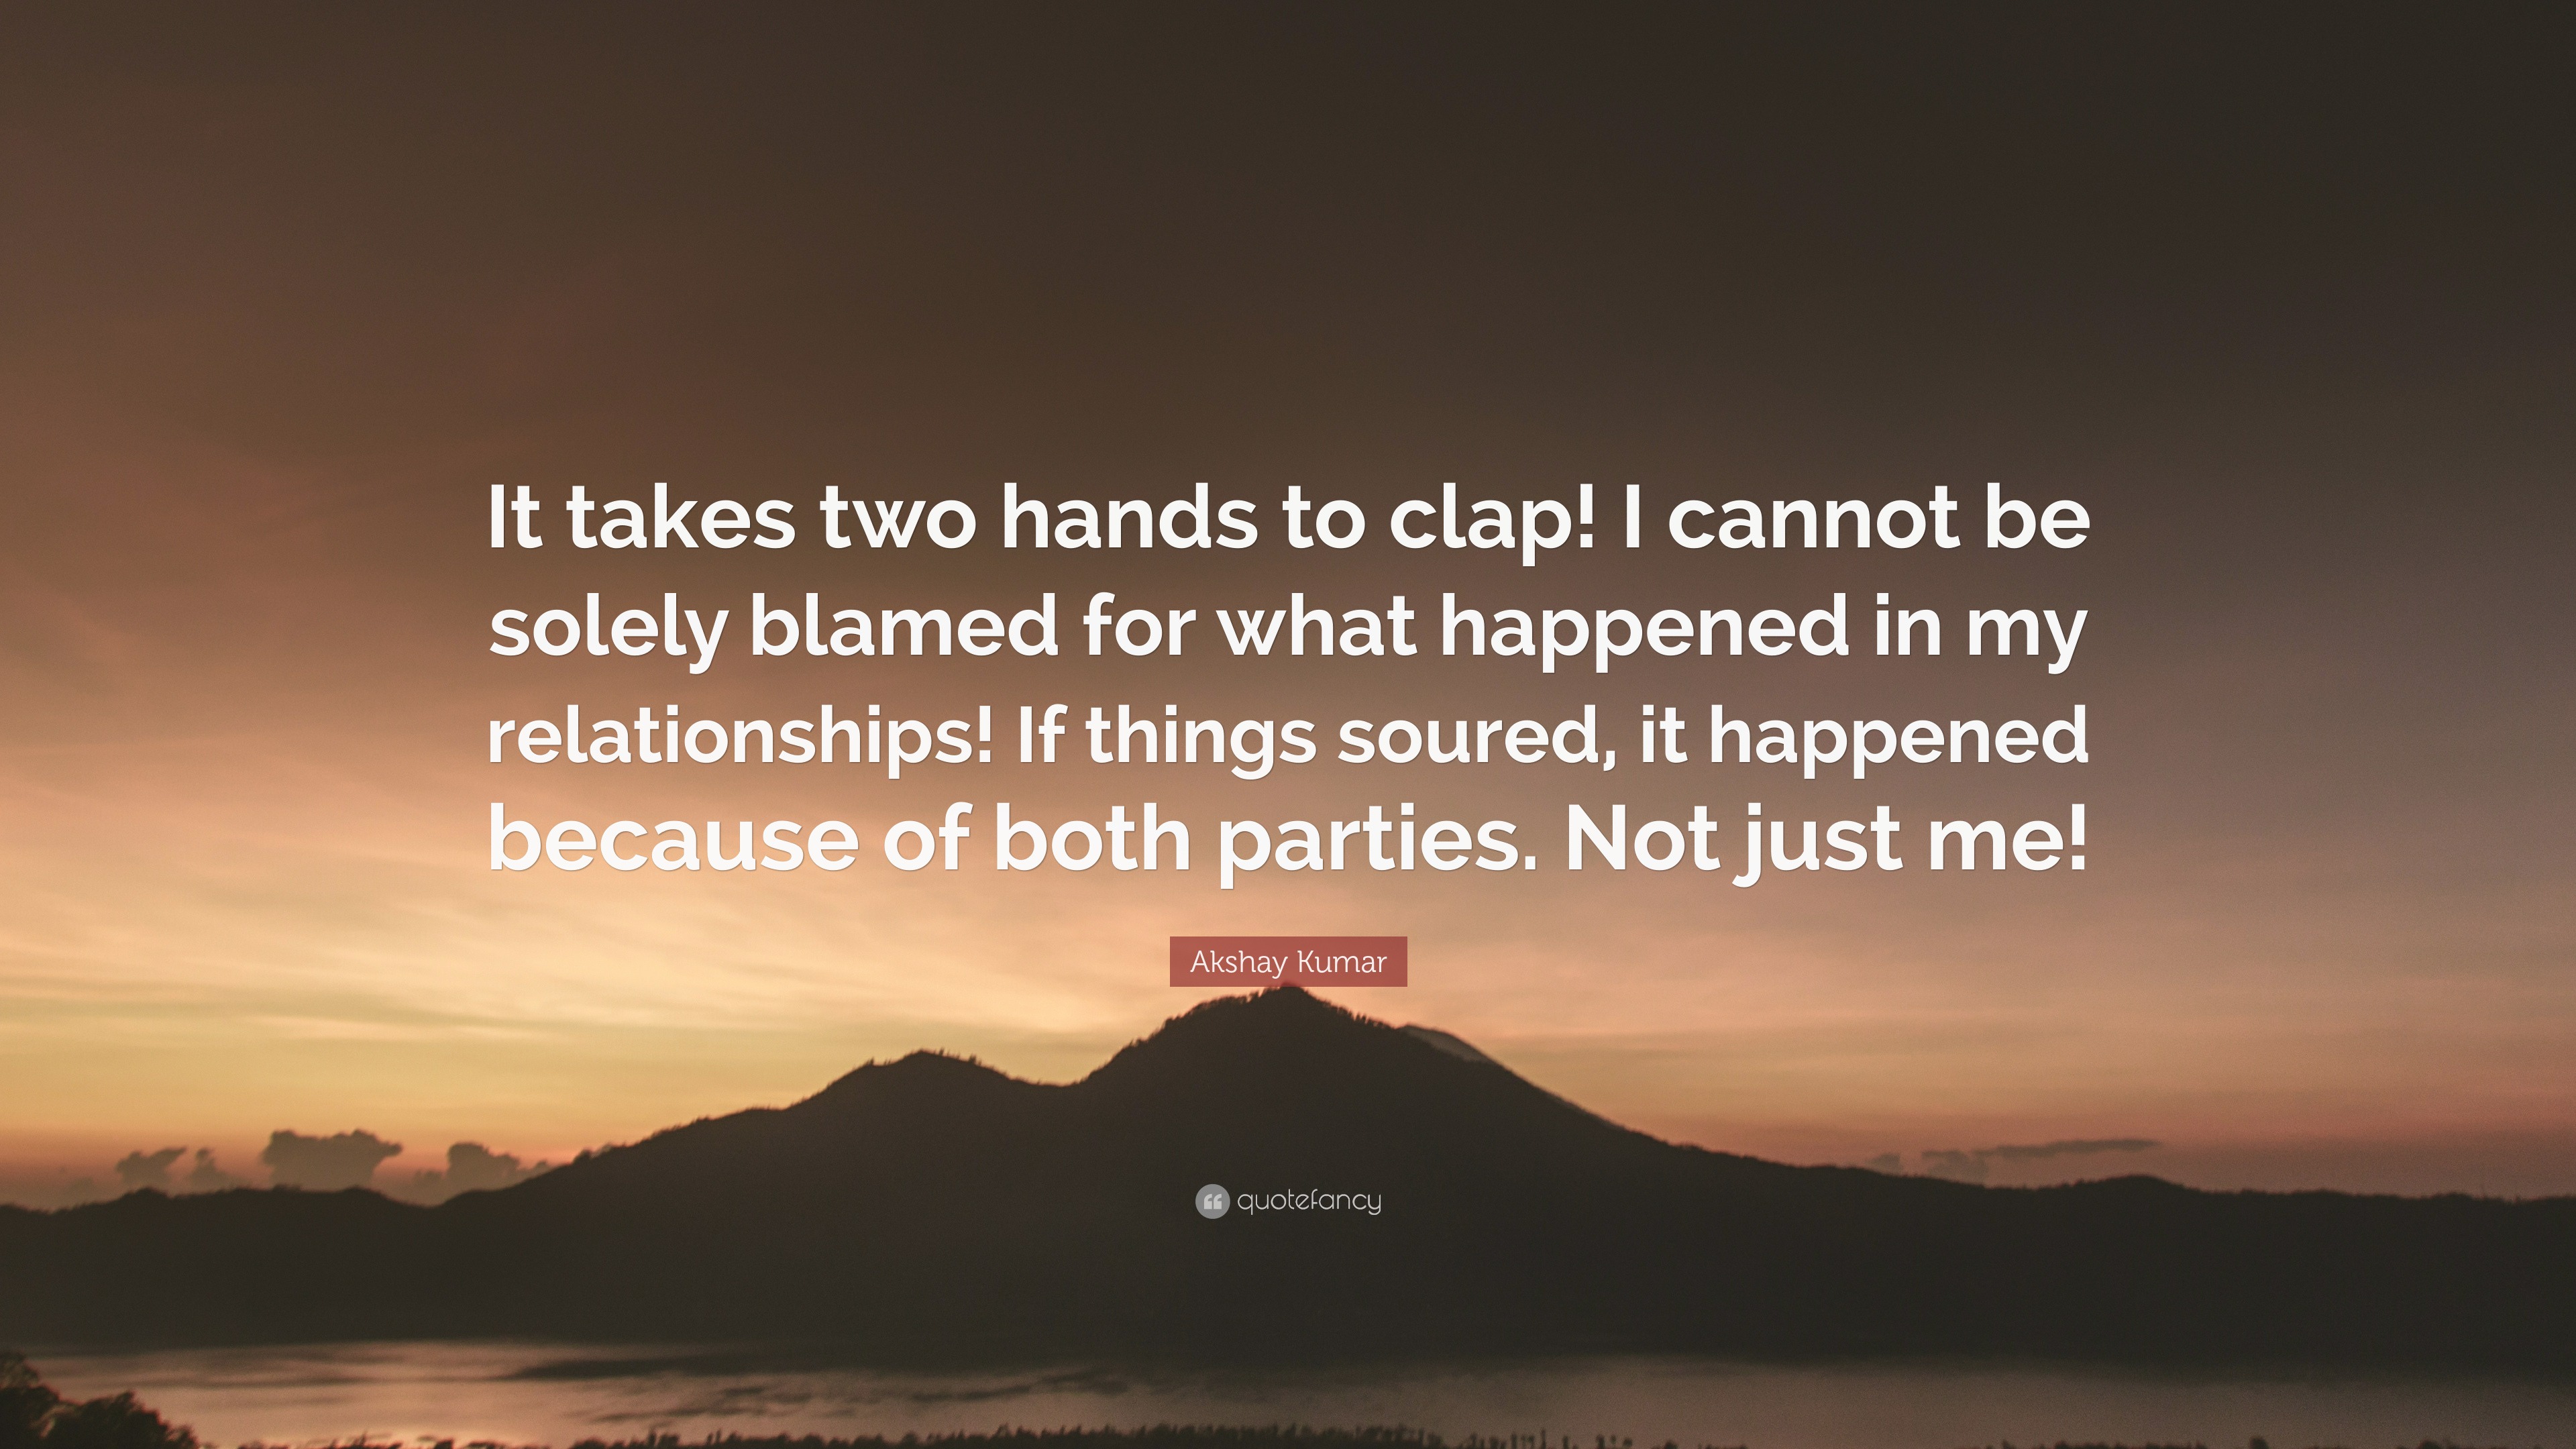 Akshay Kumar Quote “it Takes Two Hands To Clap I Cannot Be Solely